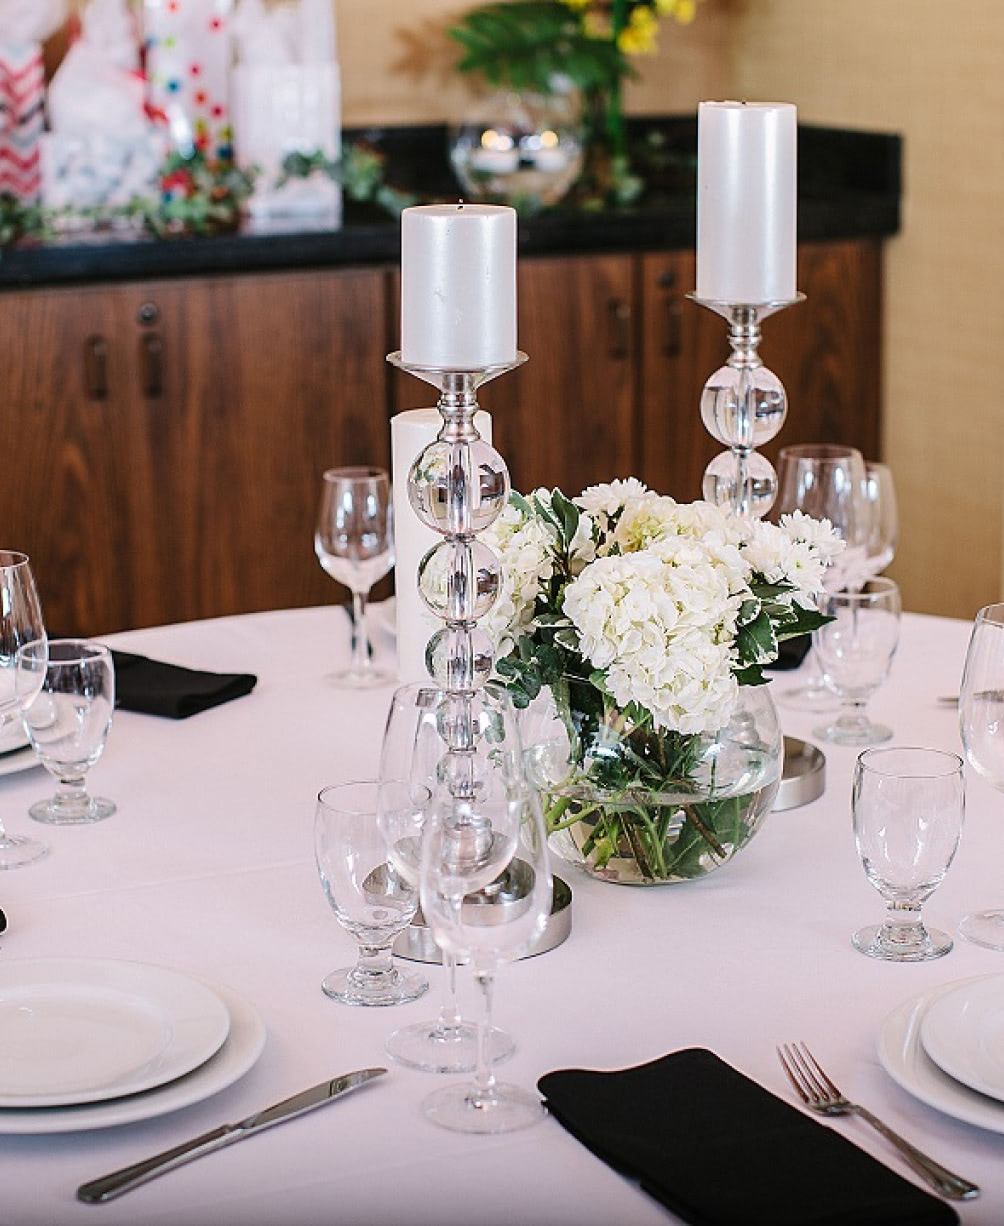 Candles and flowers as a centerpiece on a table setting